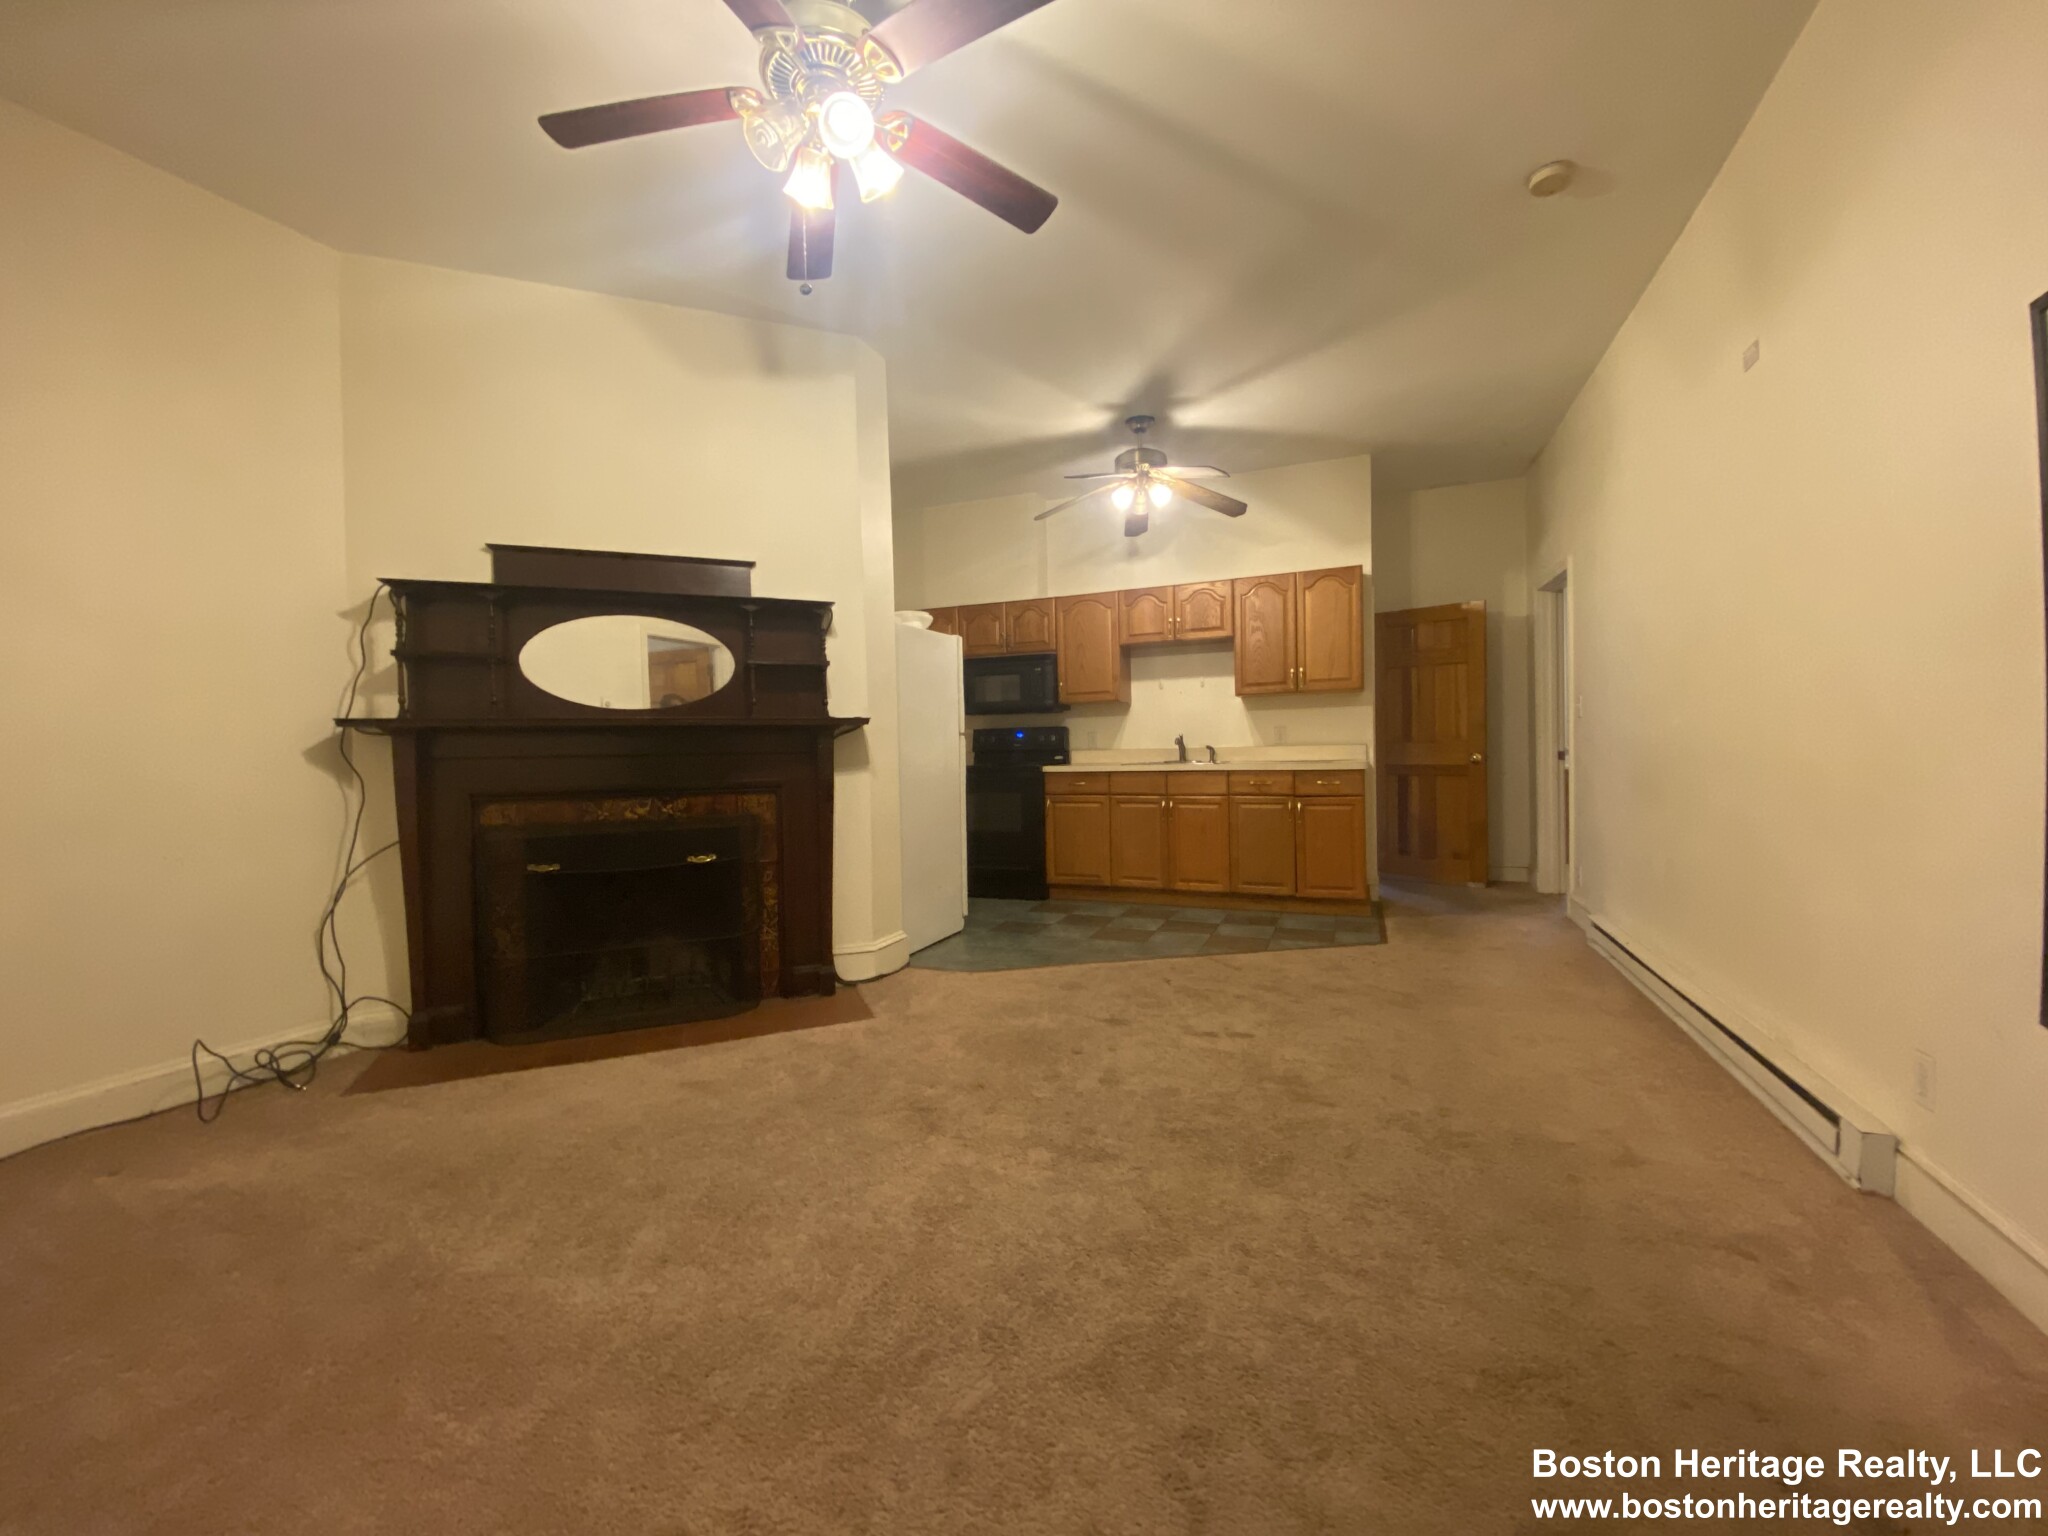 2 Beds, 1 Bath apartment in Boston, Fenway for $2,900